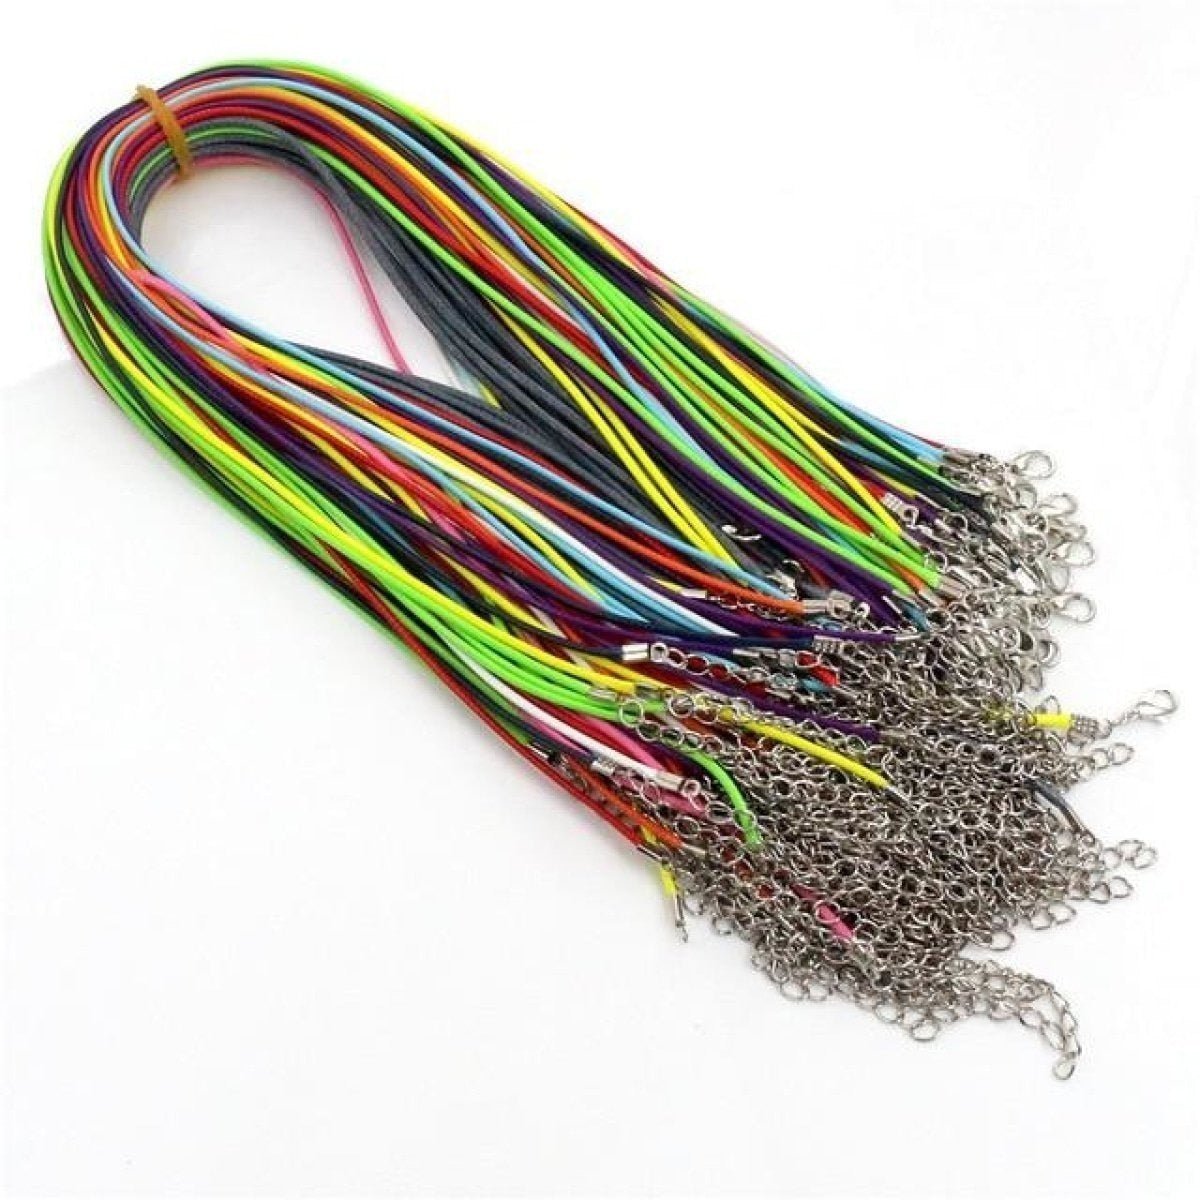 10pcs Adjustable Braided Rope Necklaces & Pendant Charms Findings Lobster Clasp String Cord 2mm - Mix - - Asia Sell